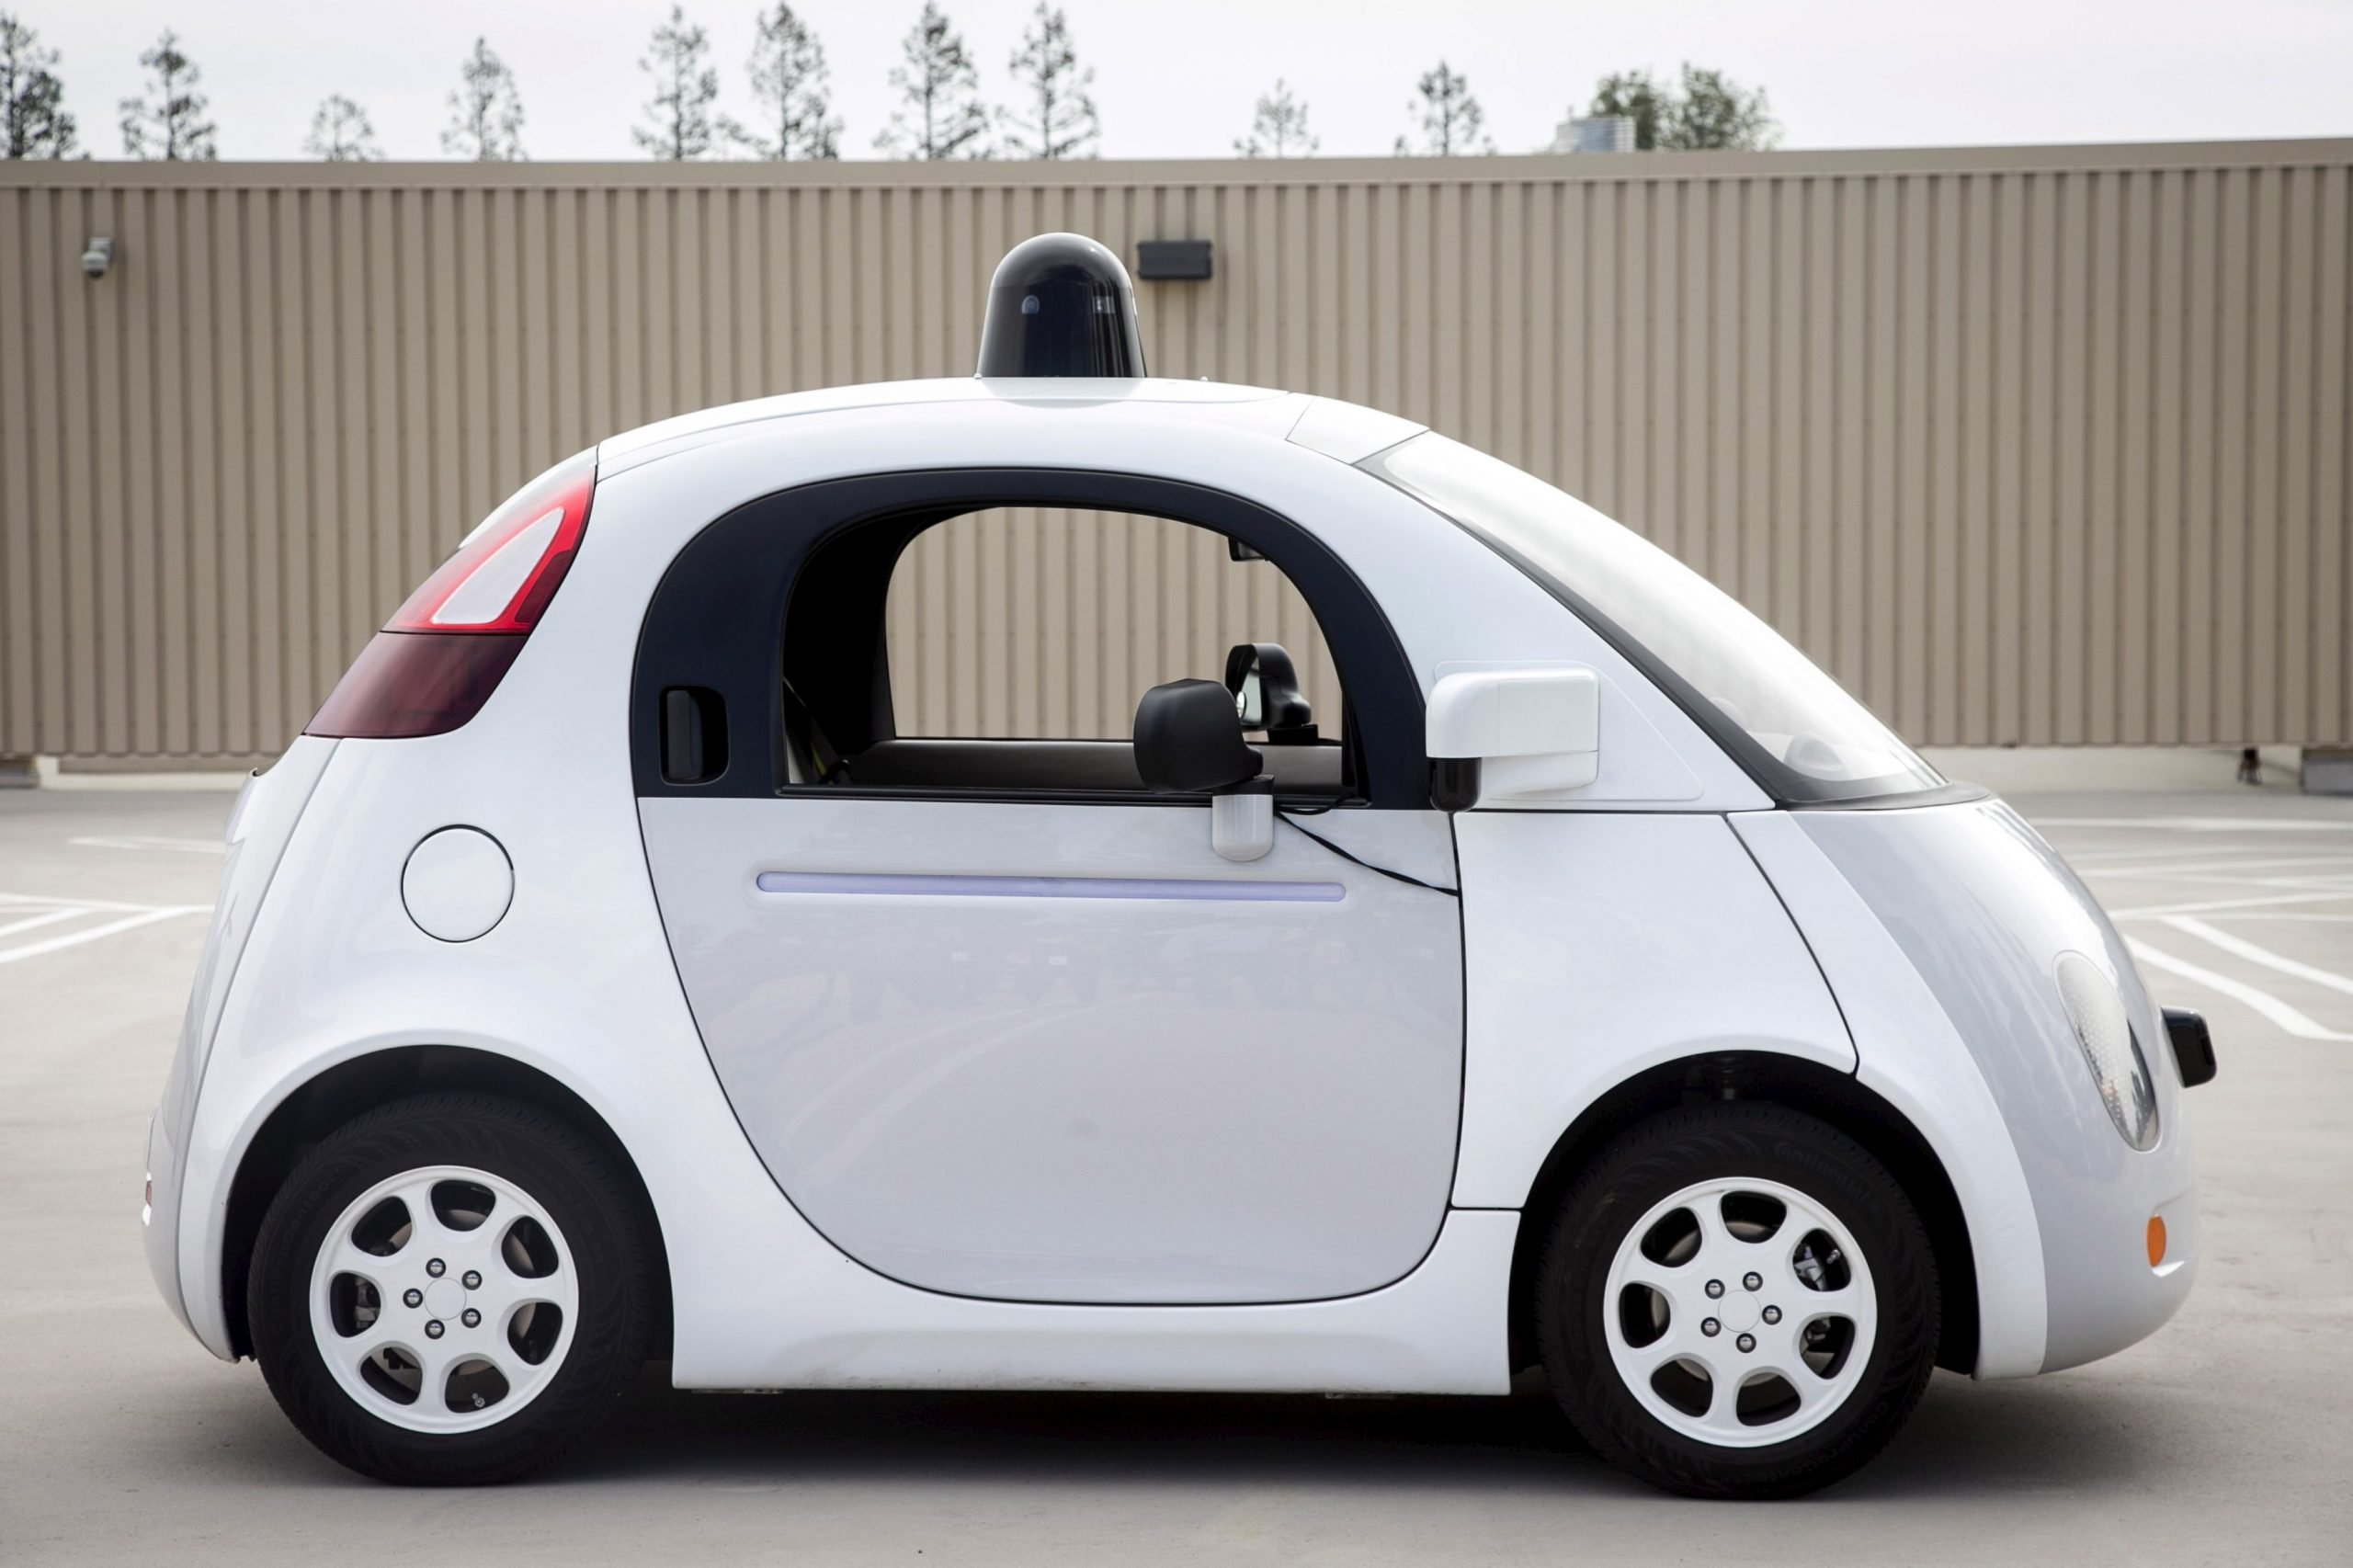 Google hires auto industry talent to push self